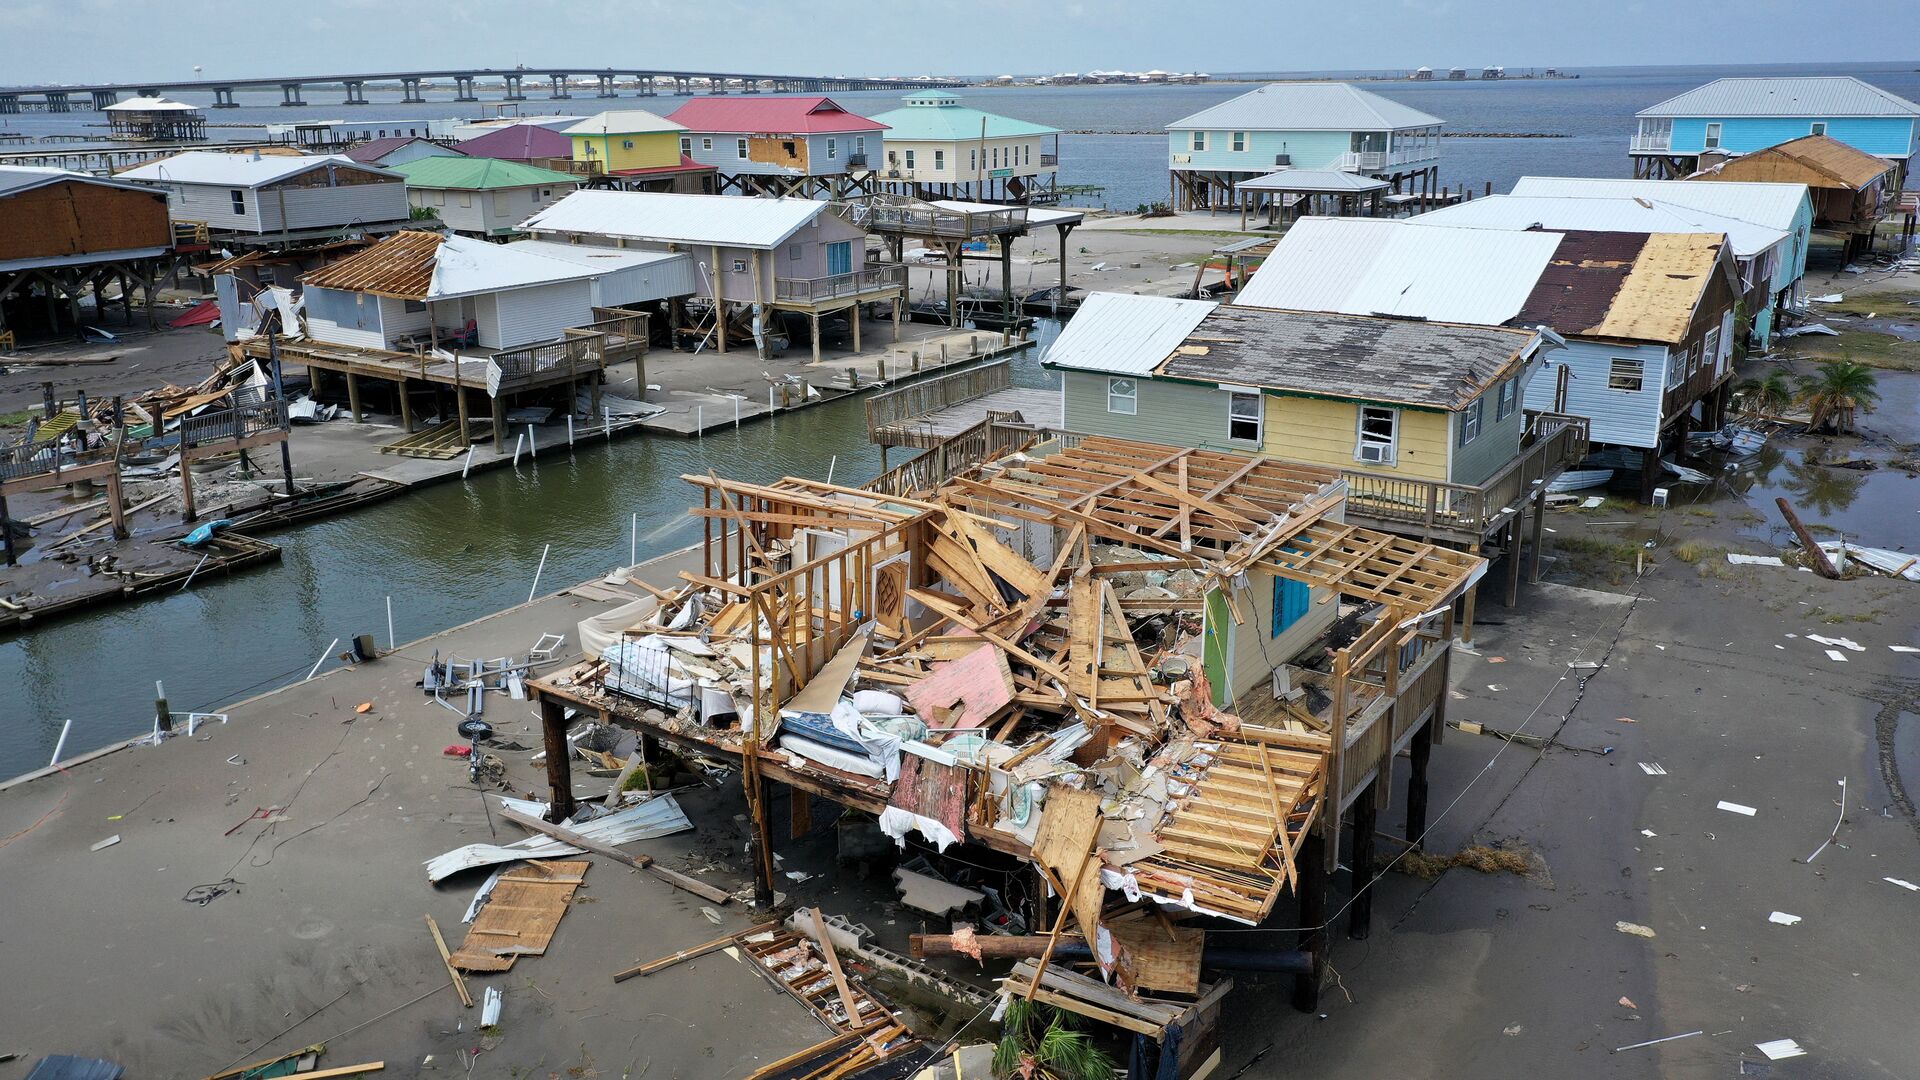 Homes destroyed in the wake of Hurricane Ida are shown September 2, 2021 in Grand Isle, Louisiana. Ida made landfall August 29 as a Category 4 storm near Grand Isle, southwest of New Orleans, causing widespread power outages, flooding and massive damage.   - Sputnik International, 1920, 08.09.2021